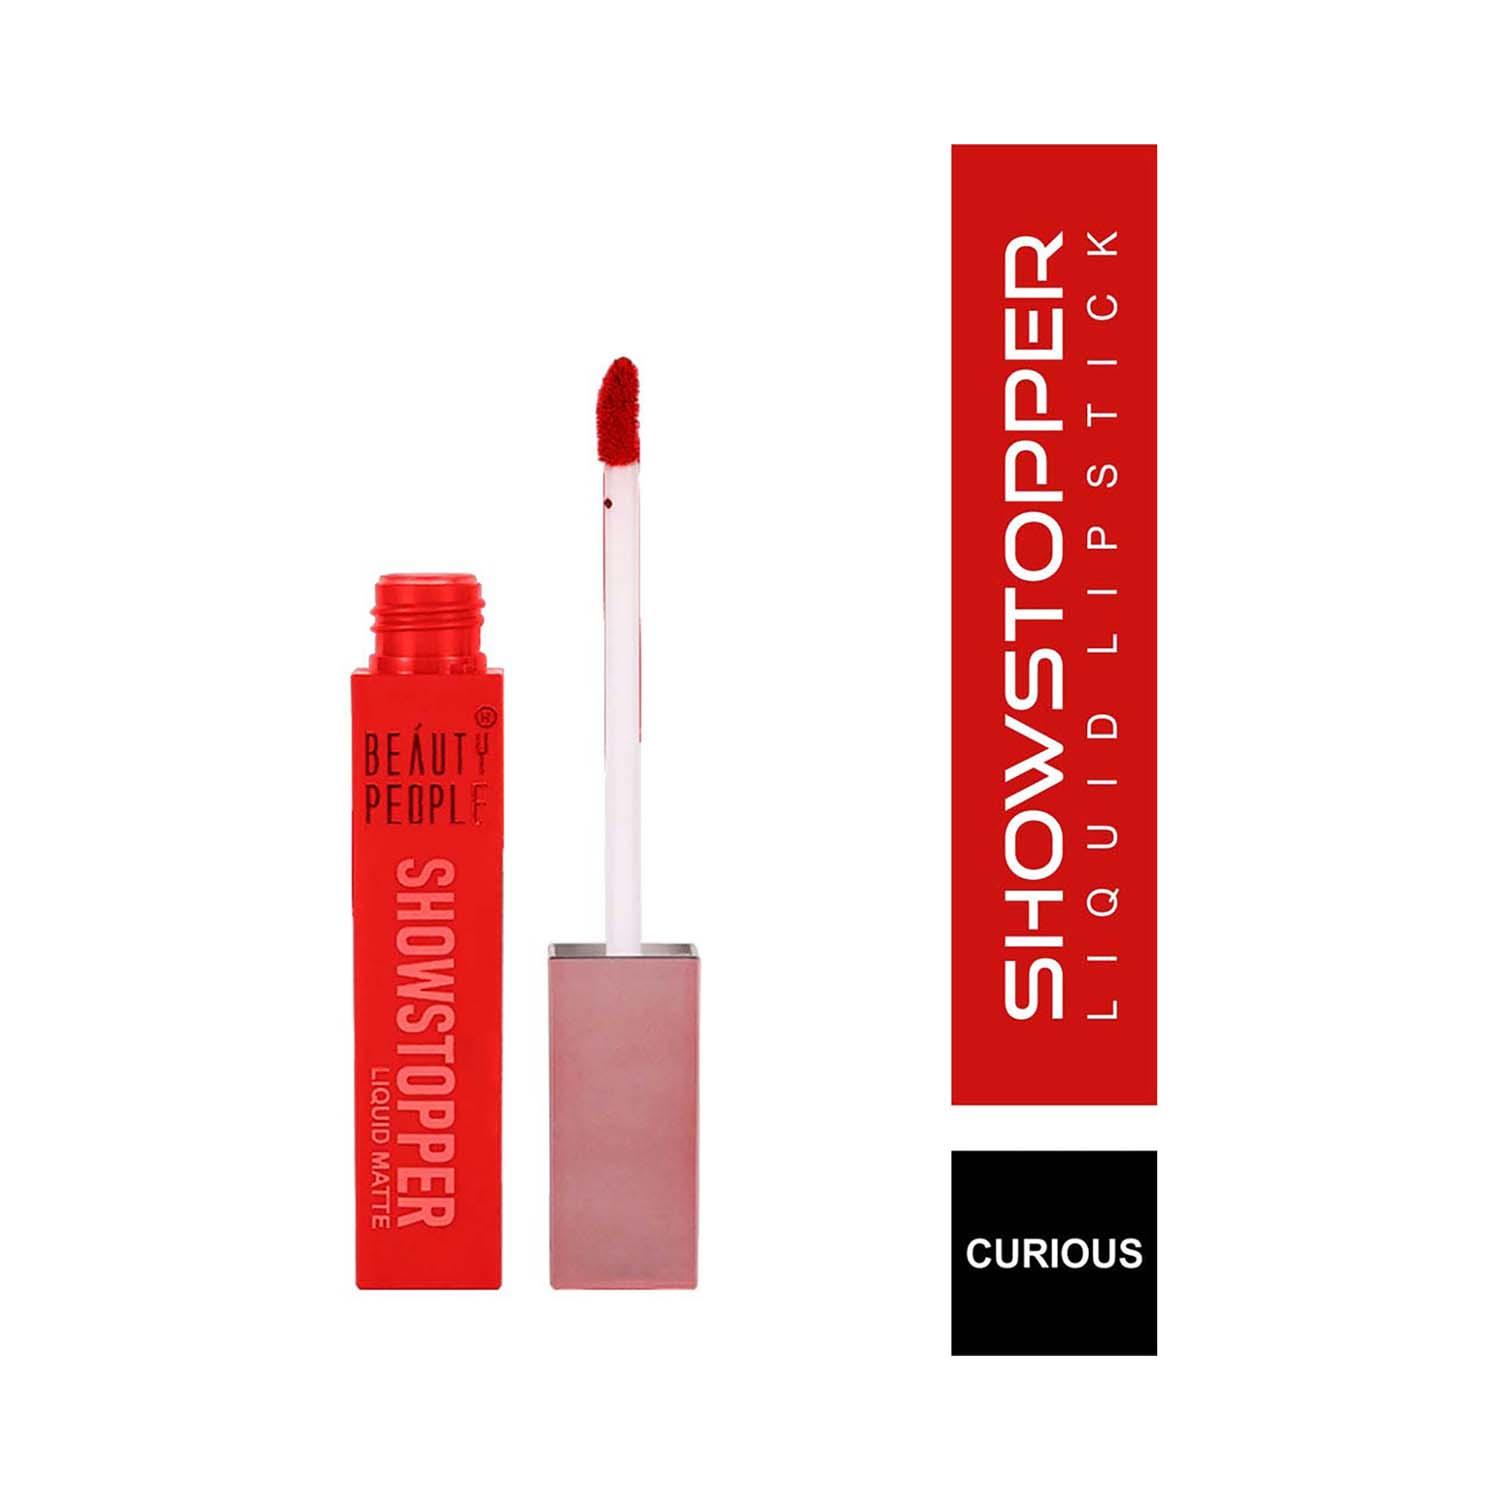 Beauty People | Beauty People Showstopper Liquid Lip Color with SPF 15 & Vitamin E - 15 Curious (4ml)